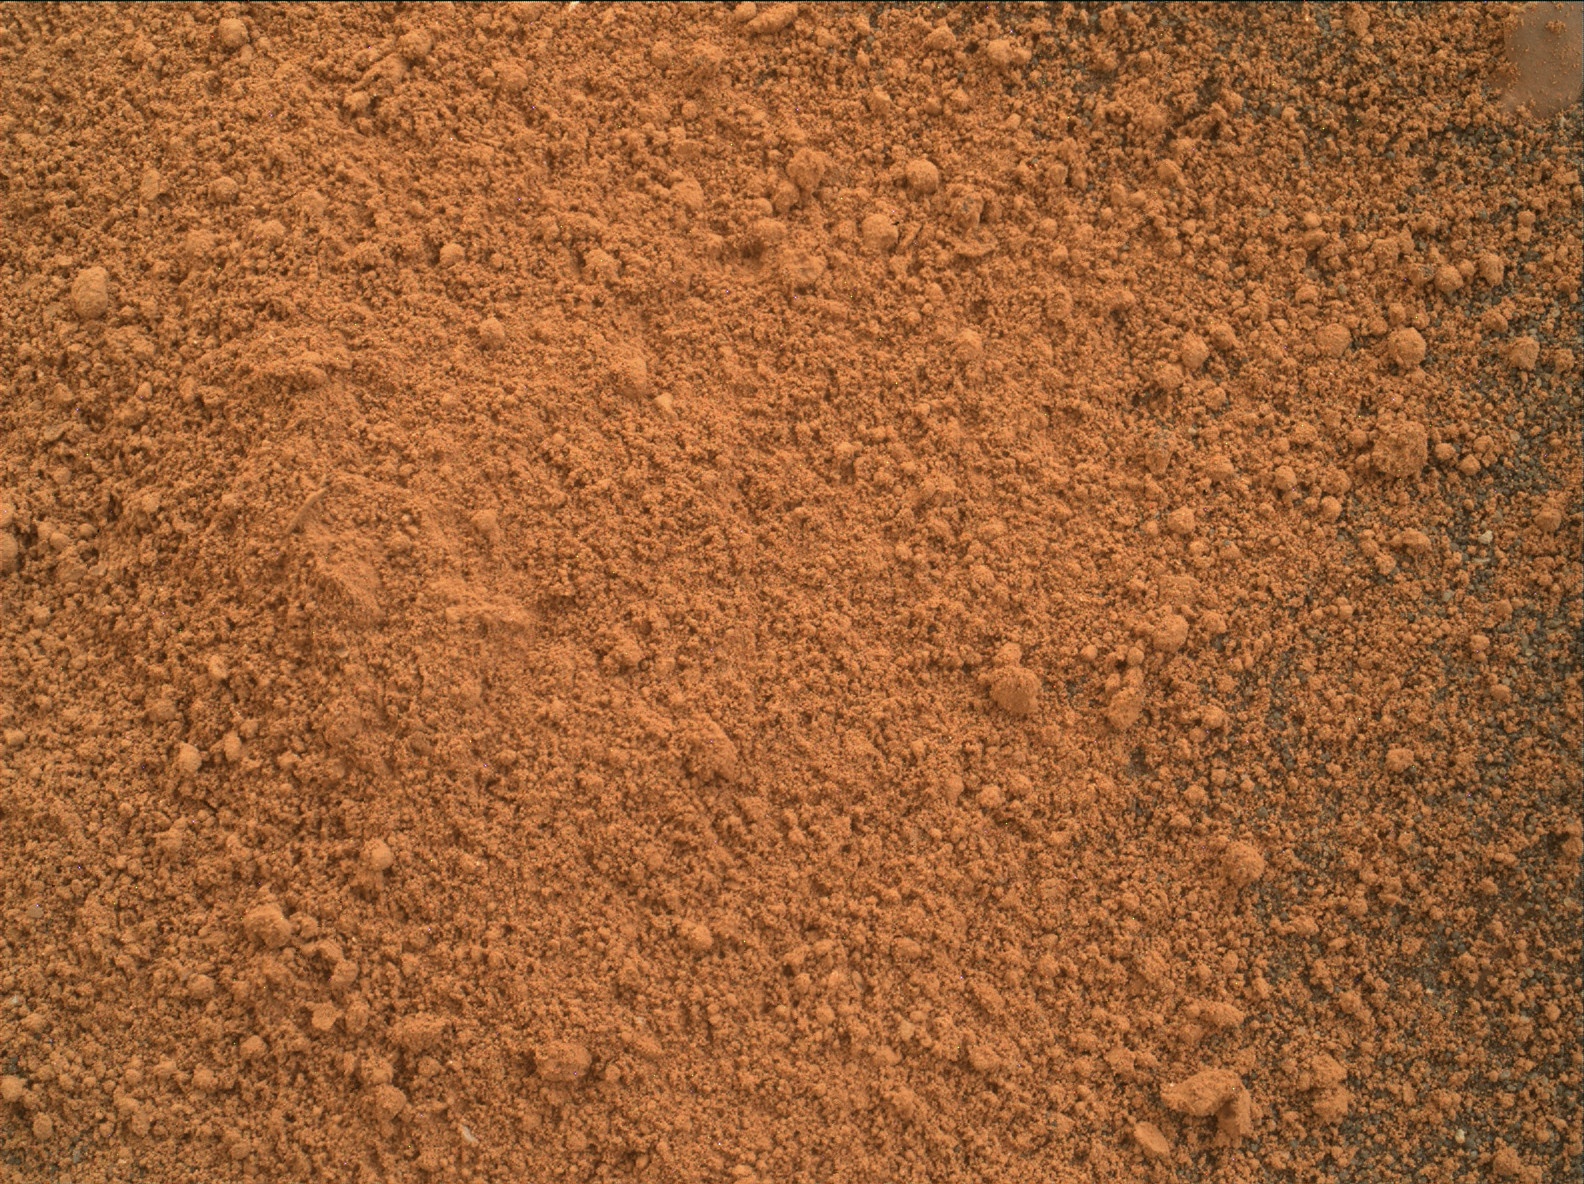 Nasa's Mars rover Curiosity acquired this image using its Mars Hand Lens Imager (MAHLI) on Sol 2080